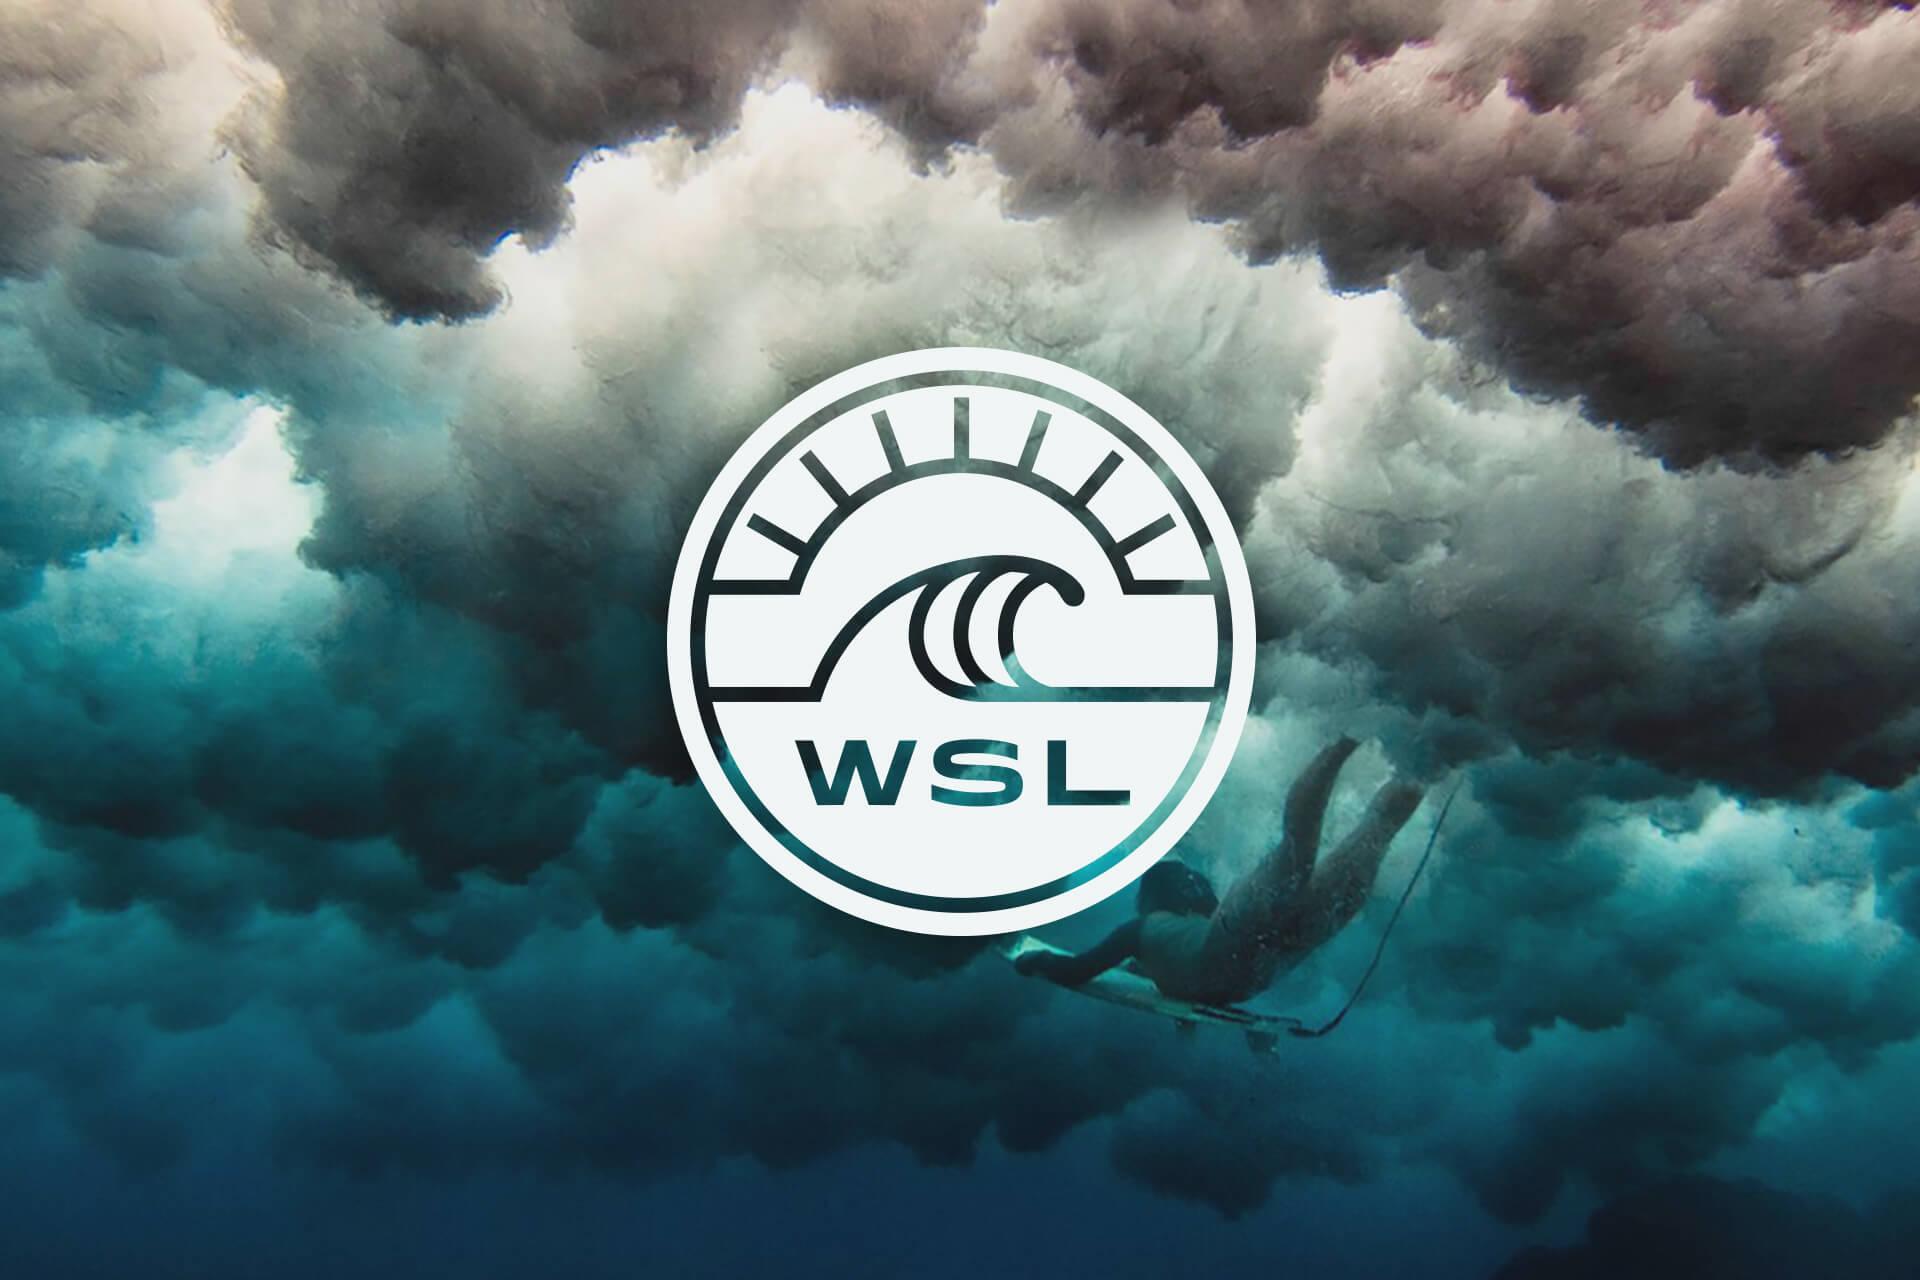 The WSL / Surf Bunker Collab